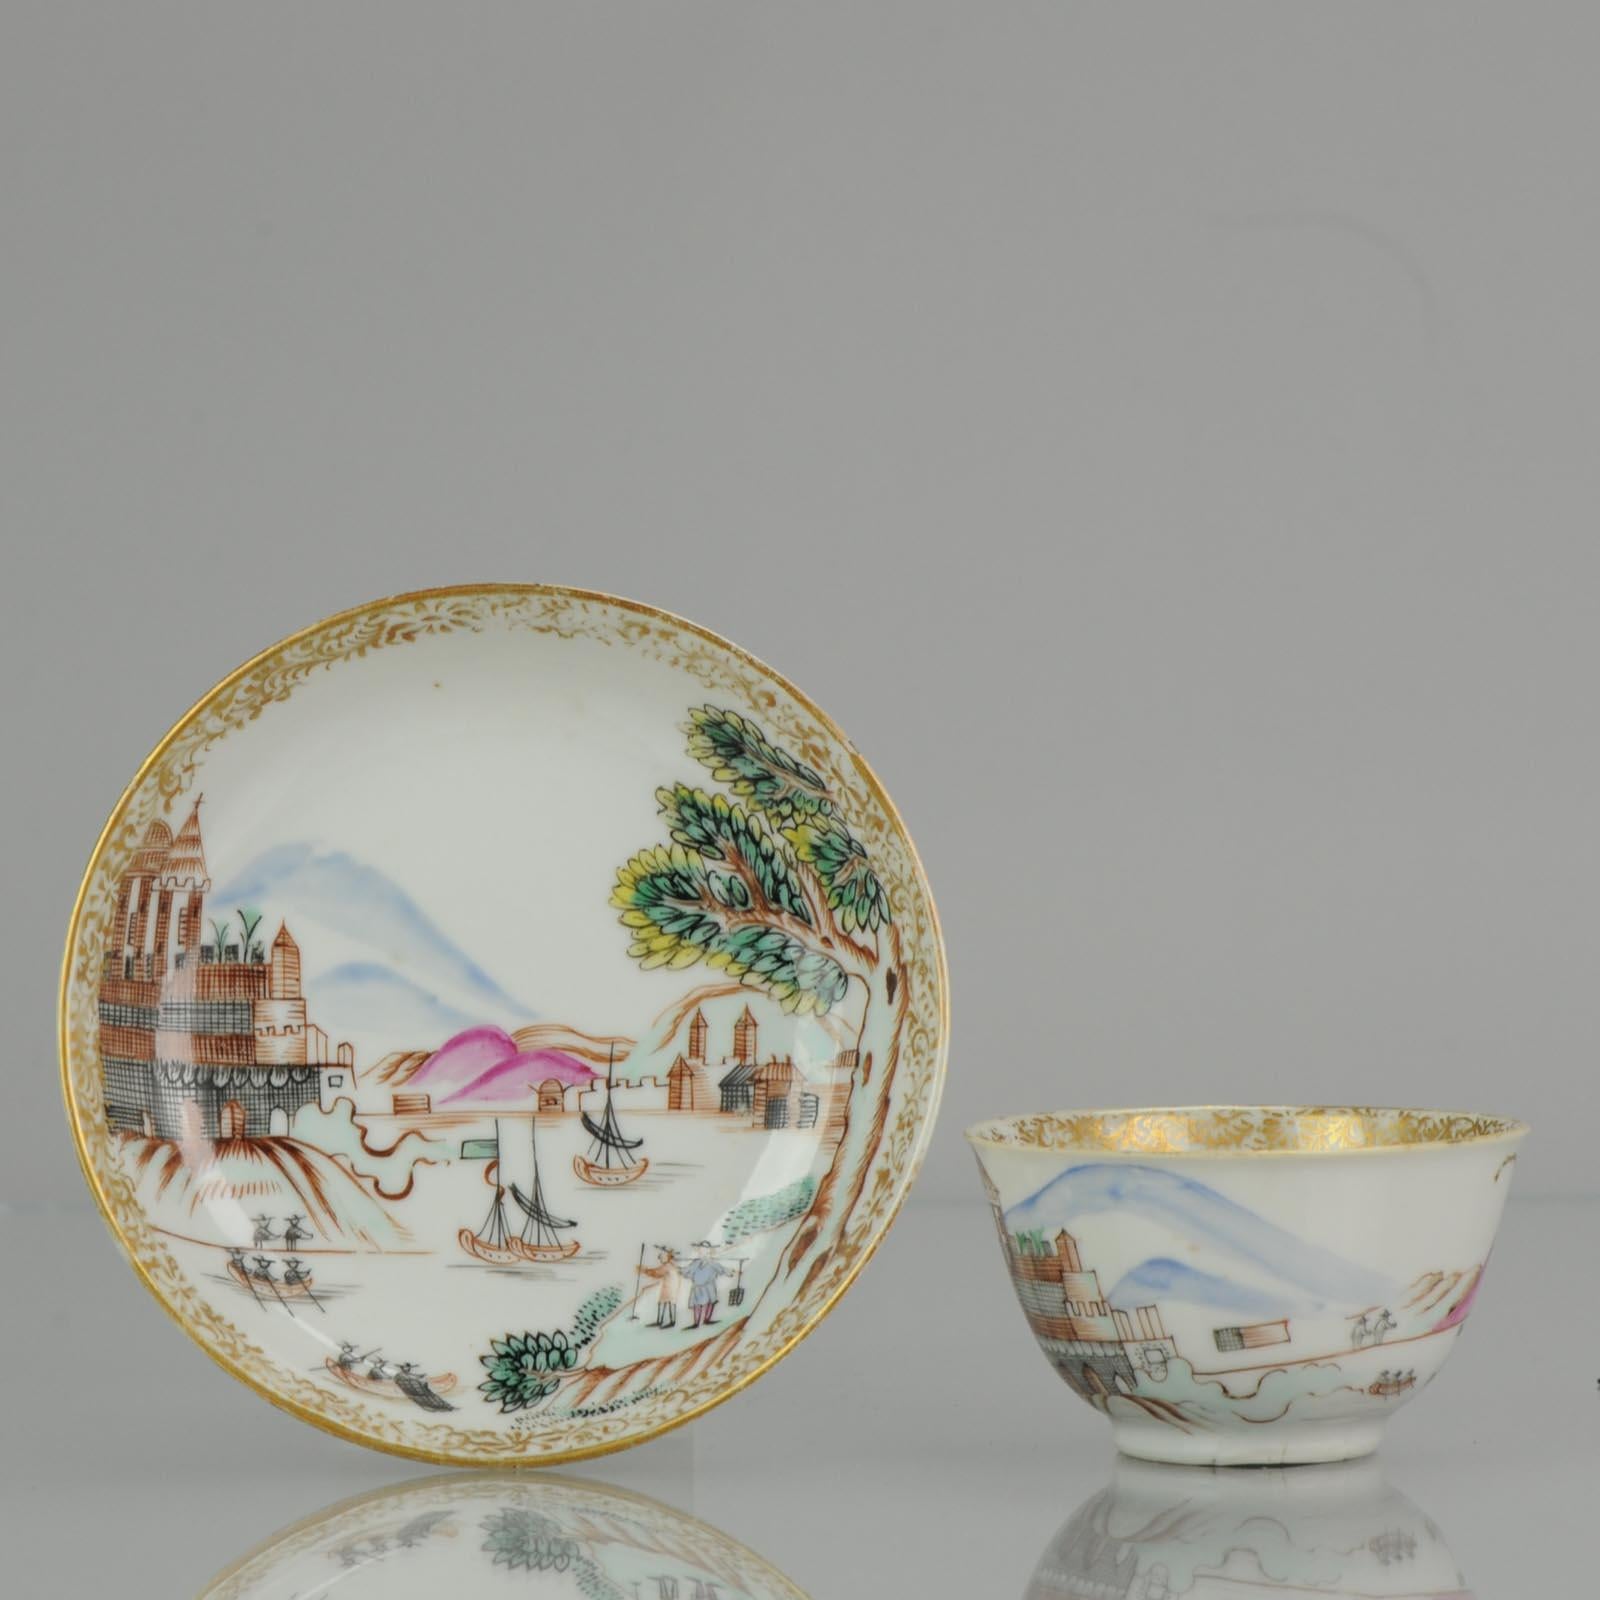 18th Century Antique Rare Cup Saucer Chine De Commande, Western Subjects Meissen In Good Condition For Sale In Amsterdam, Noord Holland